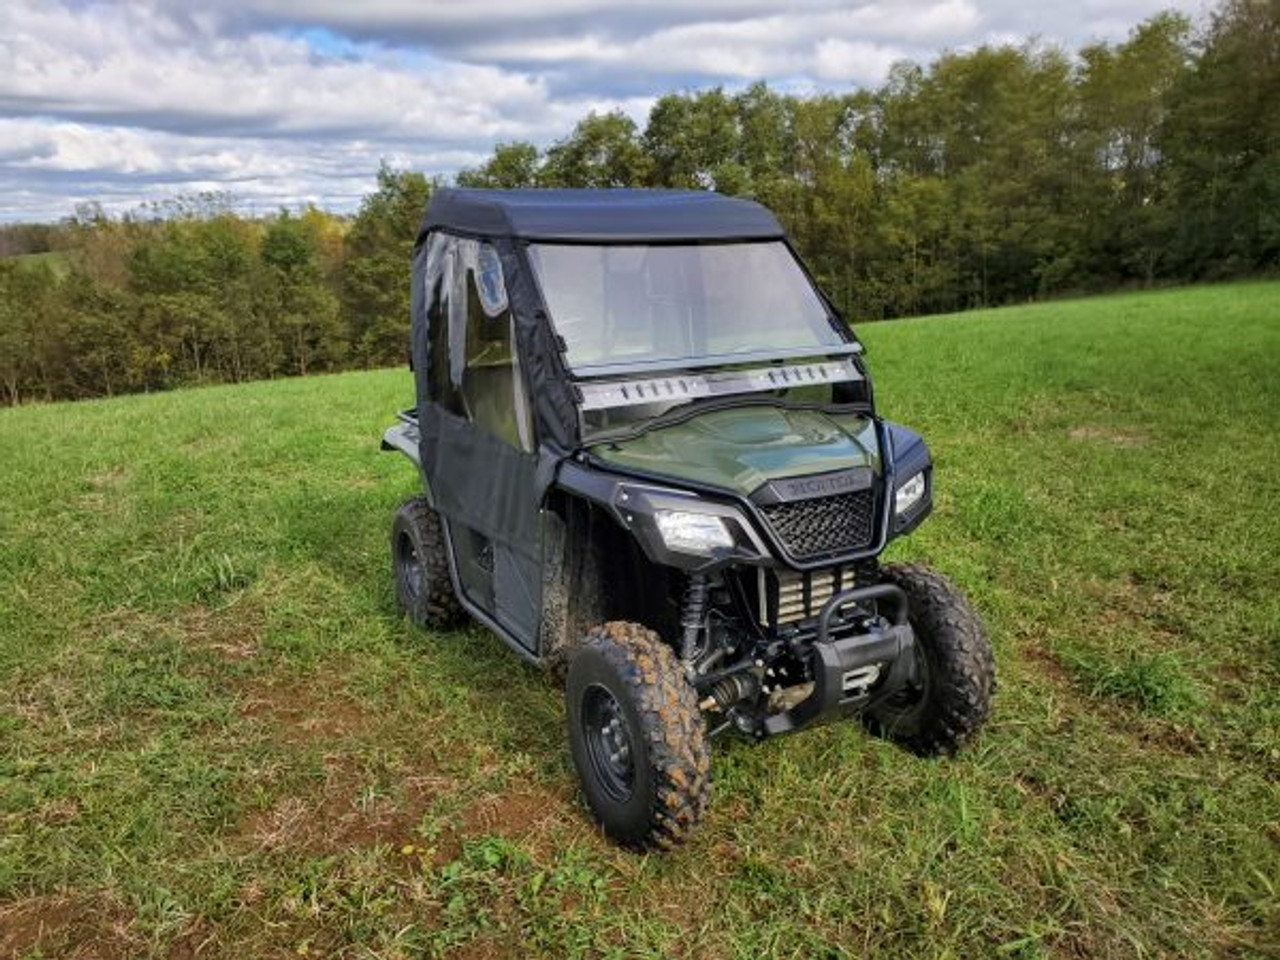 3 Star side x side Honda Pioneer 500/520 full cab enclosure front view